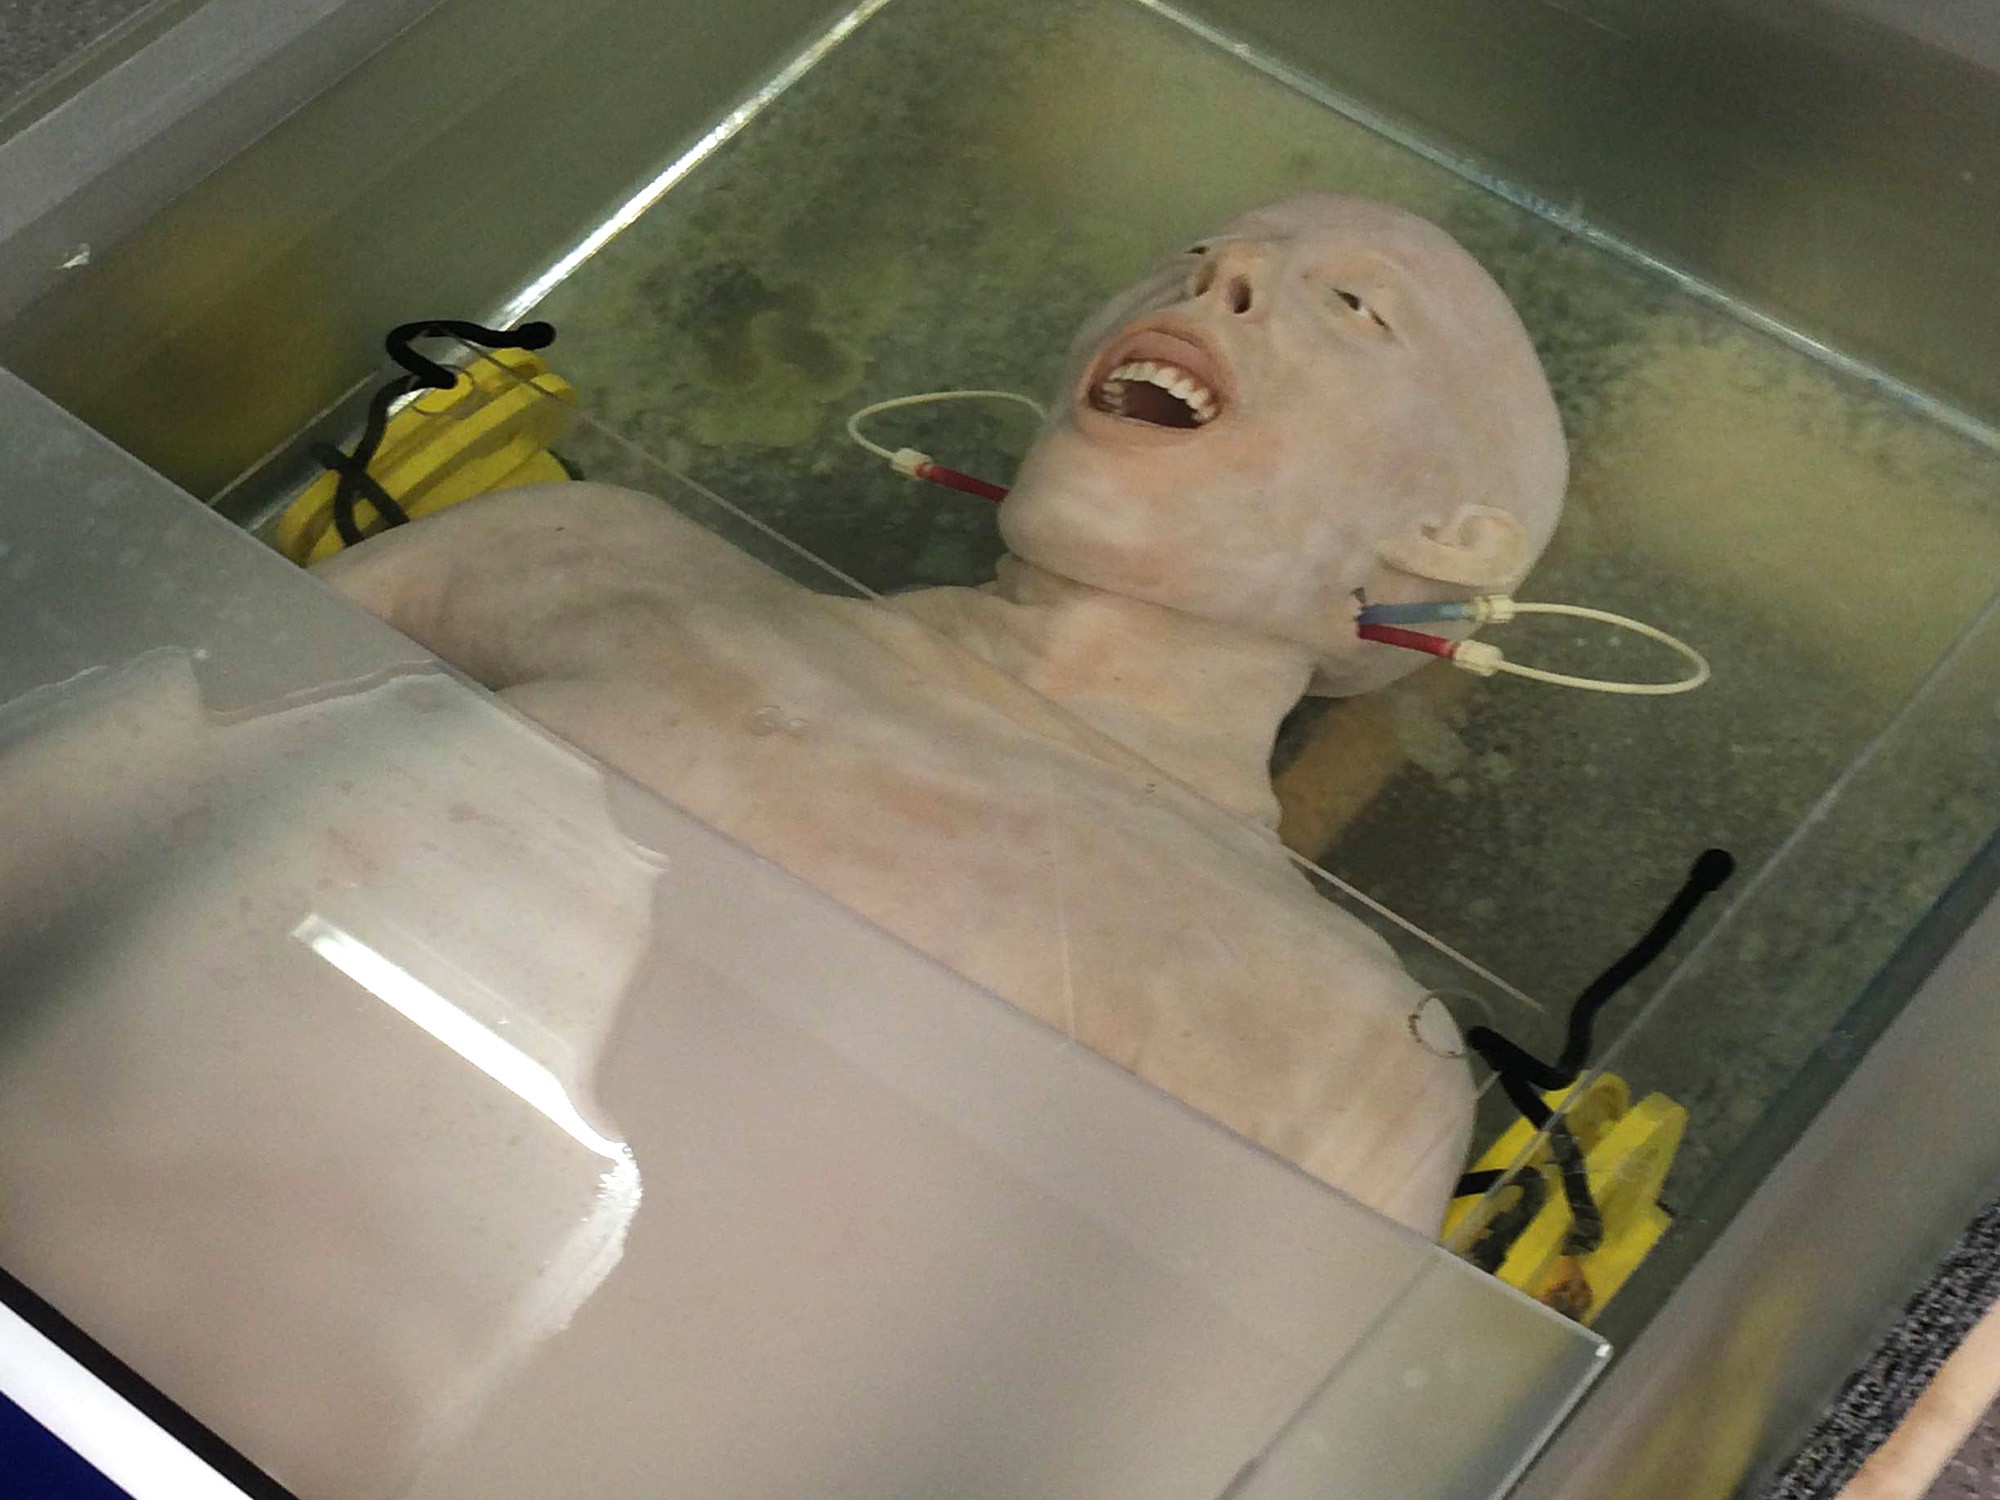 UA’s medical school expands simulation center for hands-on learning ...